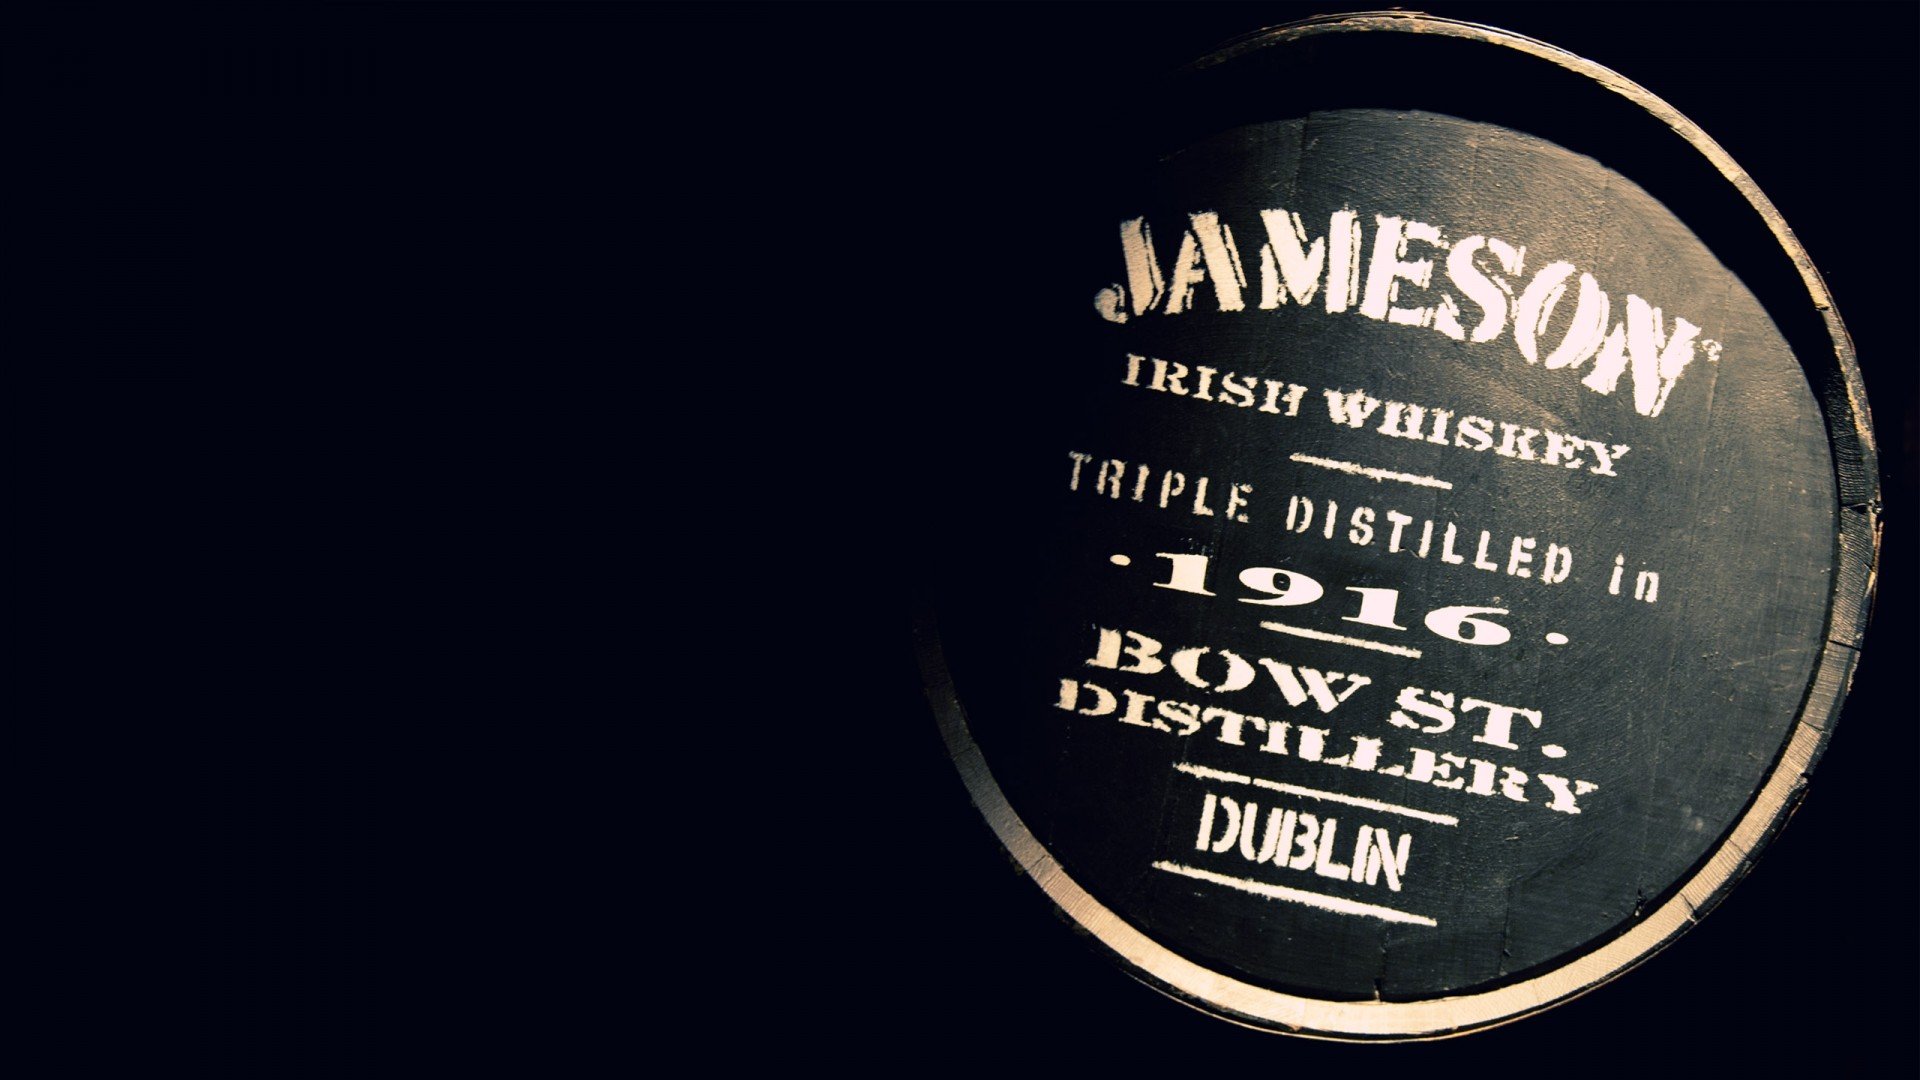 Alcohol whiskey jameson beverages whisky barrels wallpaper 1920x1080 1920x1080